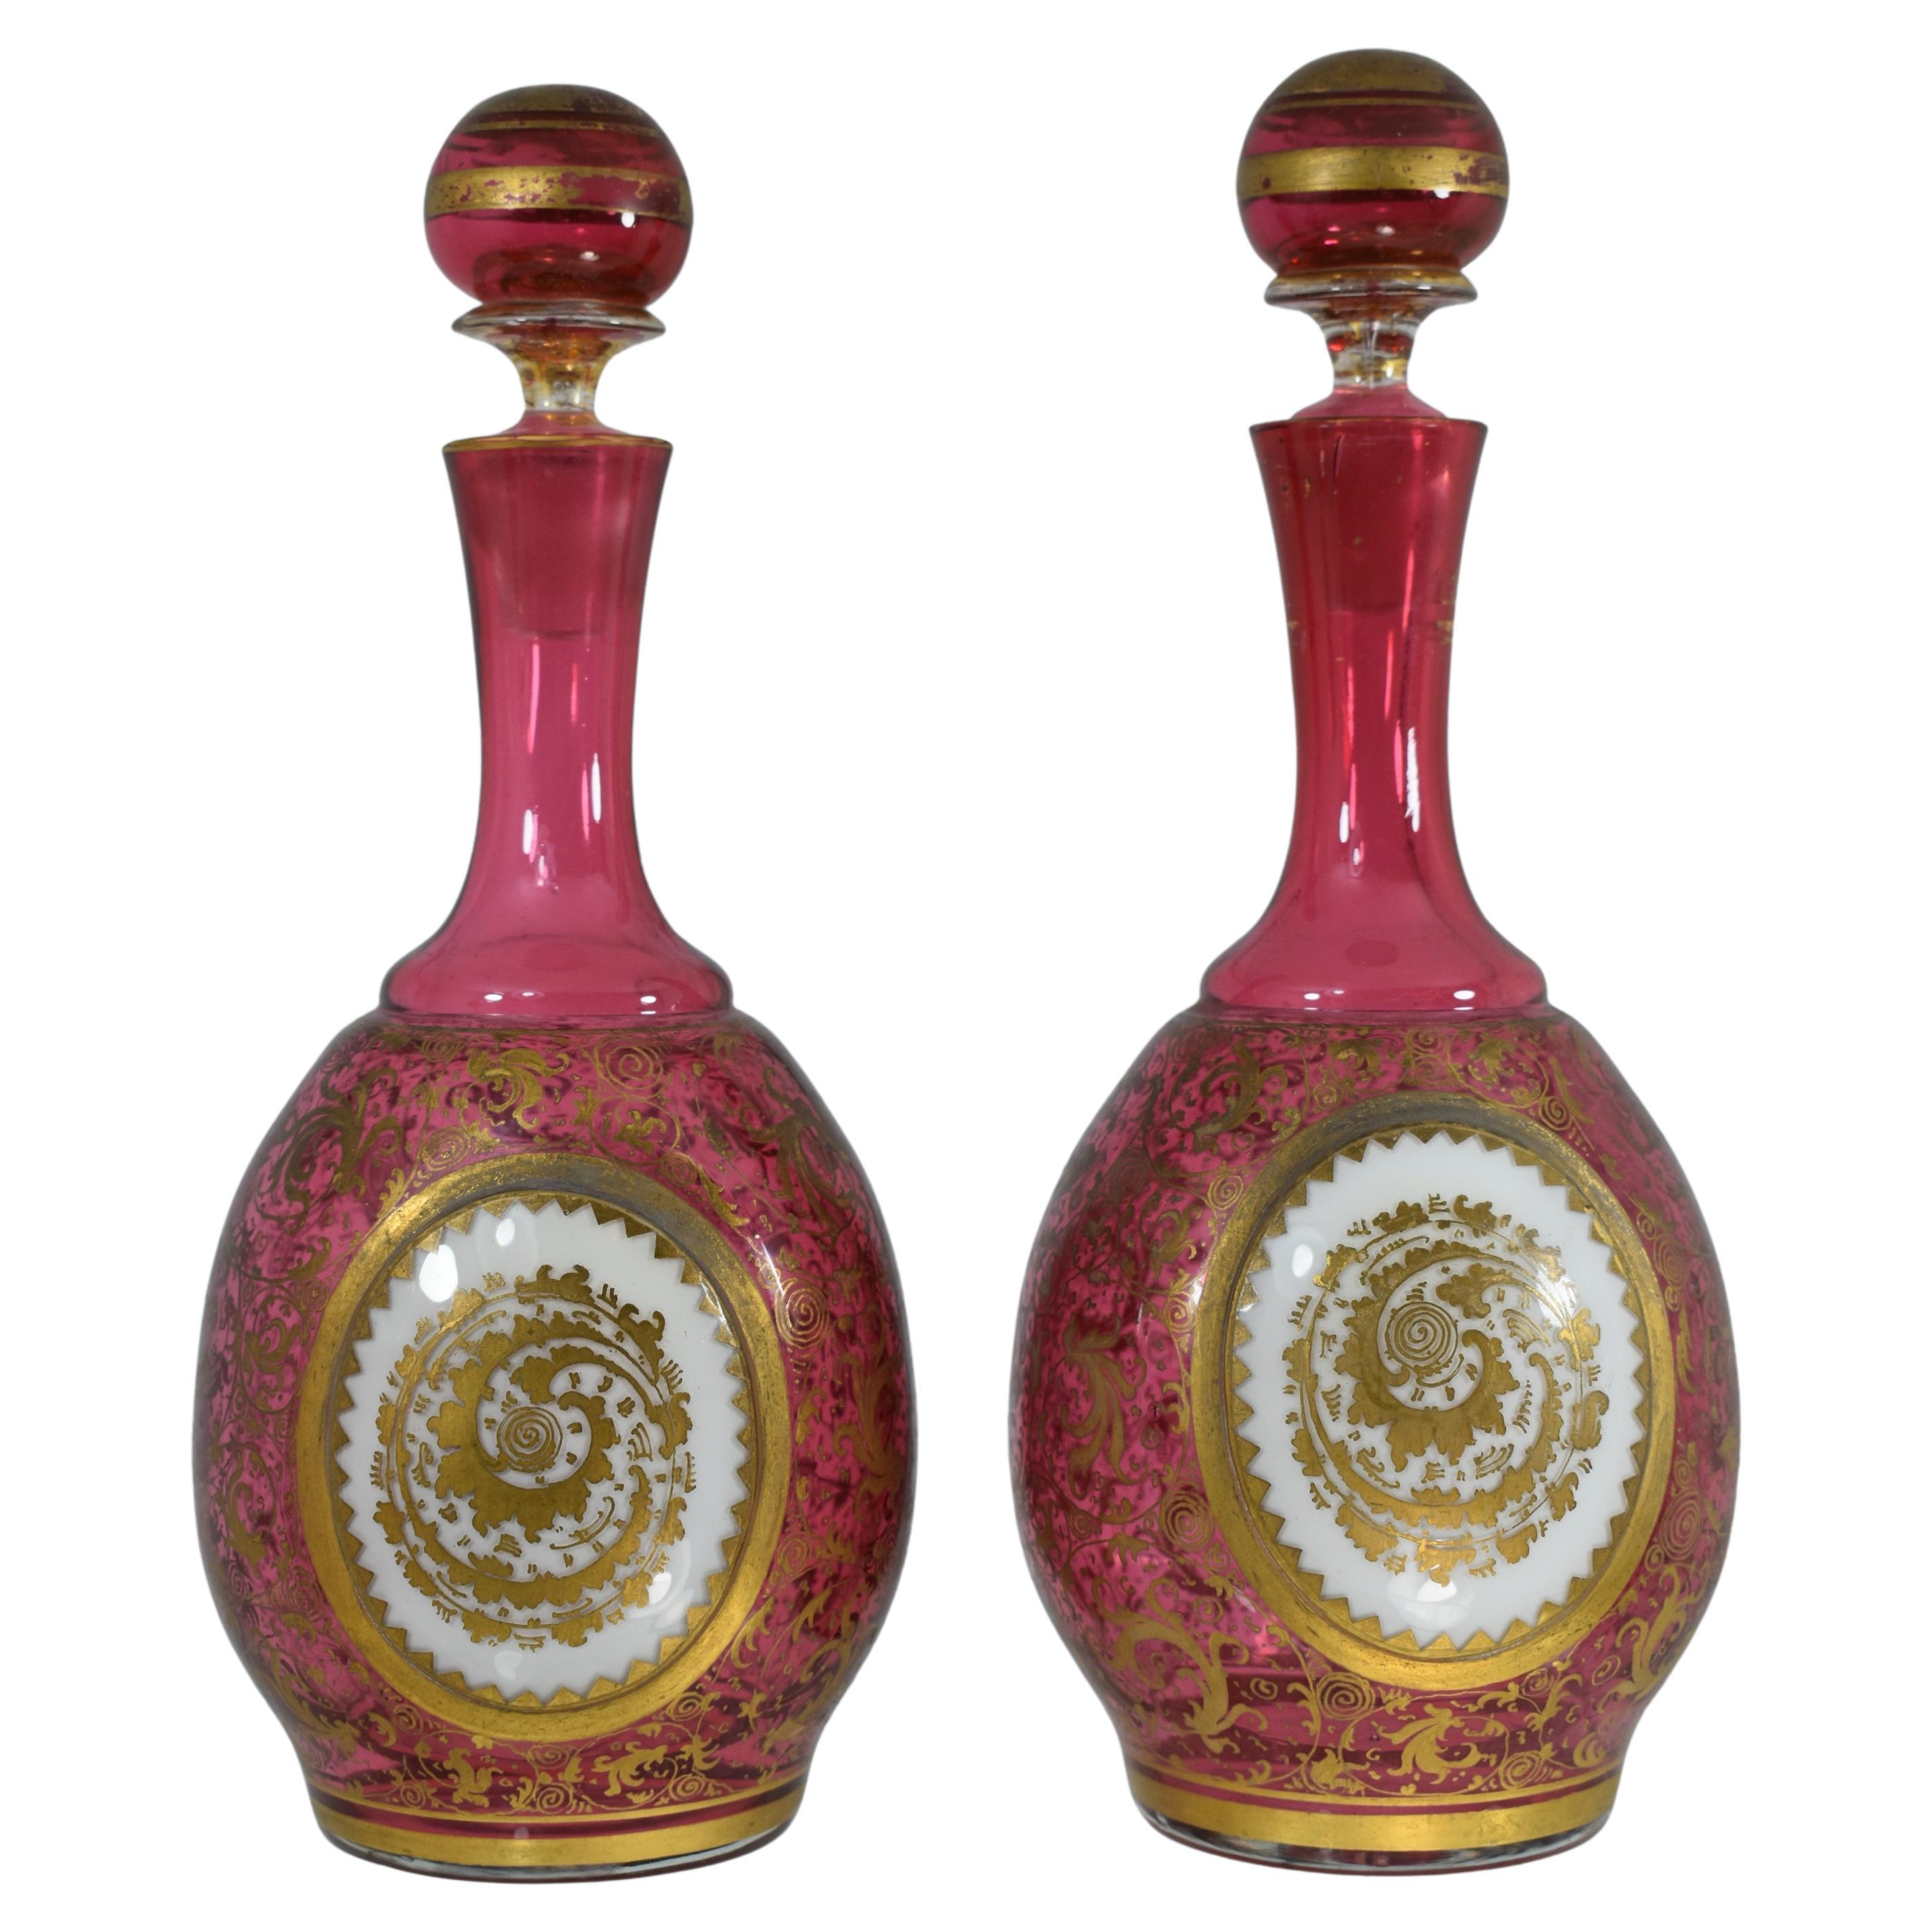 European Antique Bohemian Cranberry Overlay Glass Vanity Set, Moser, 19th Century For Sale